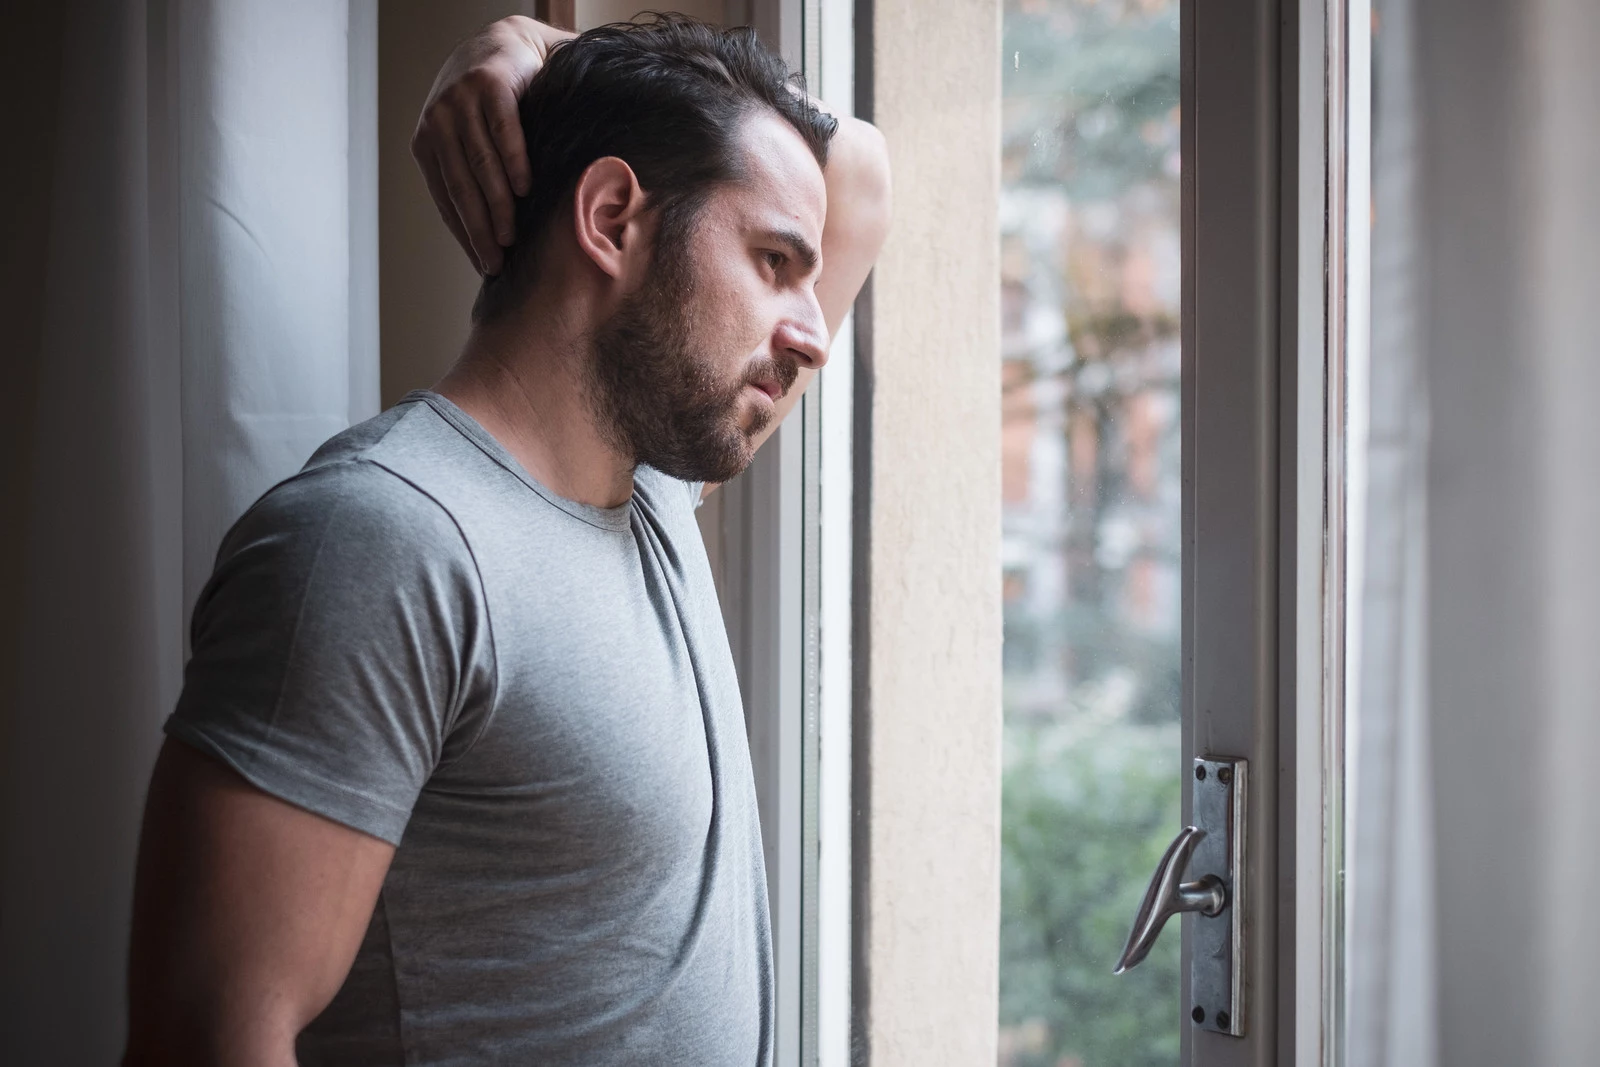 Man suffering and feeling alone at home